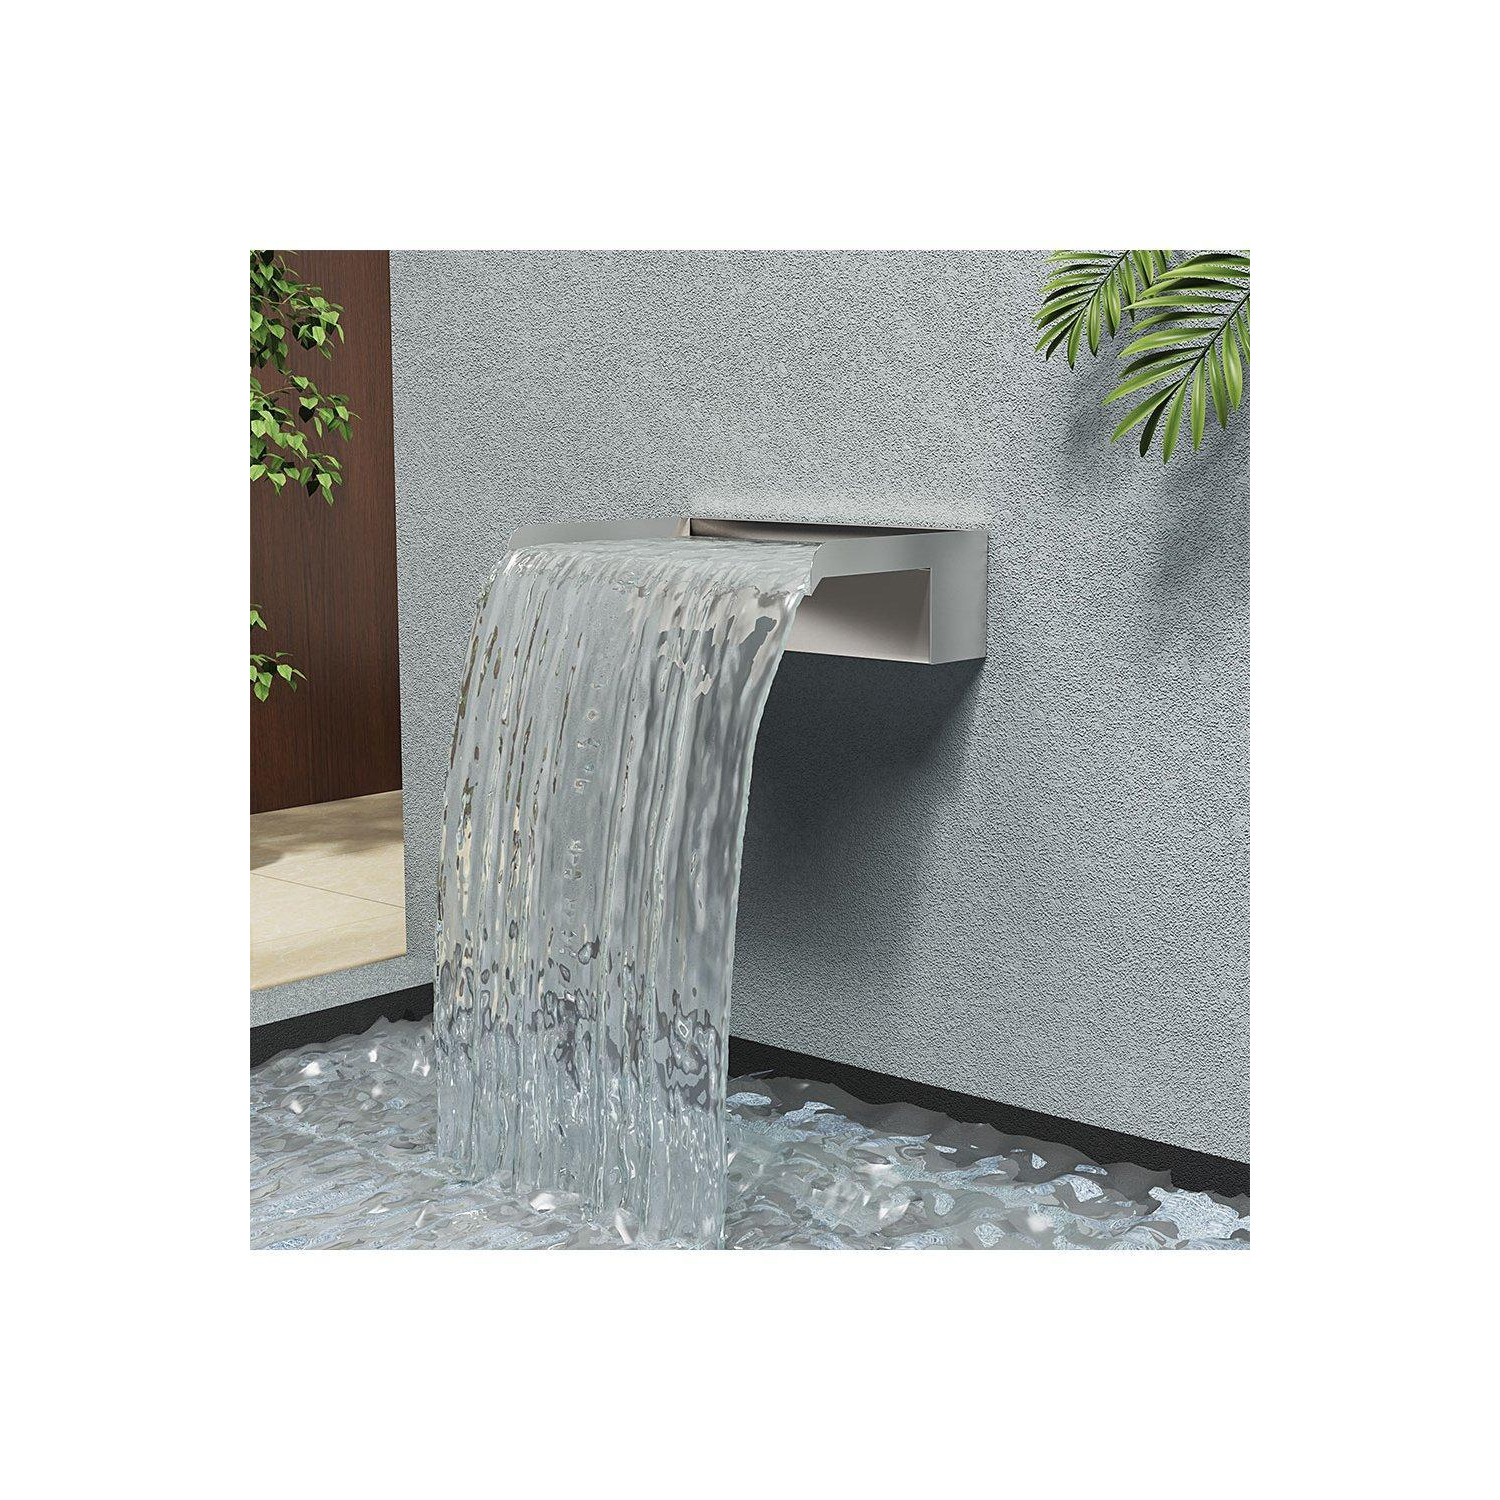 30cmW x 20cmD Wall-Mounted Stainless Steel Water Blade Waterfall Pool Fountain Garden - image 1